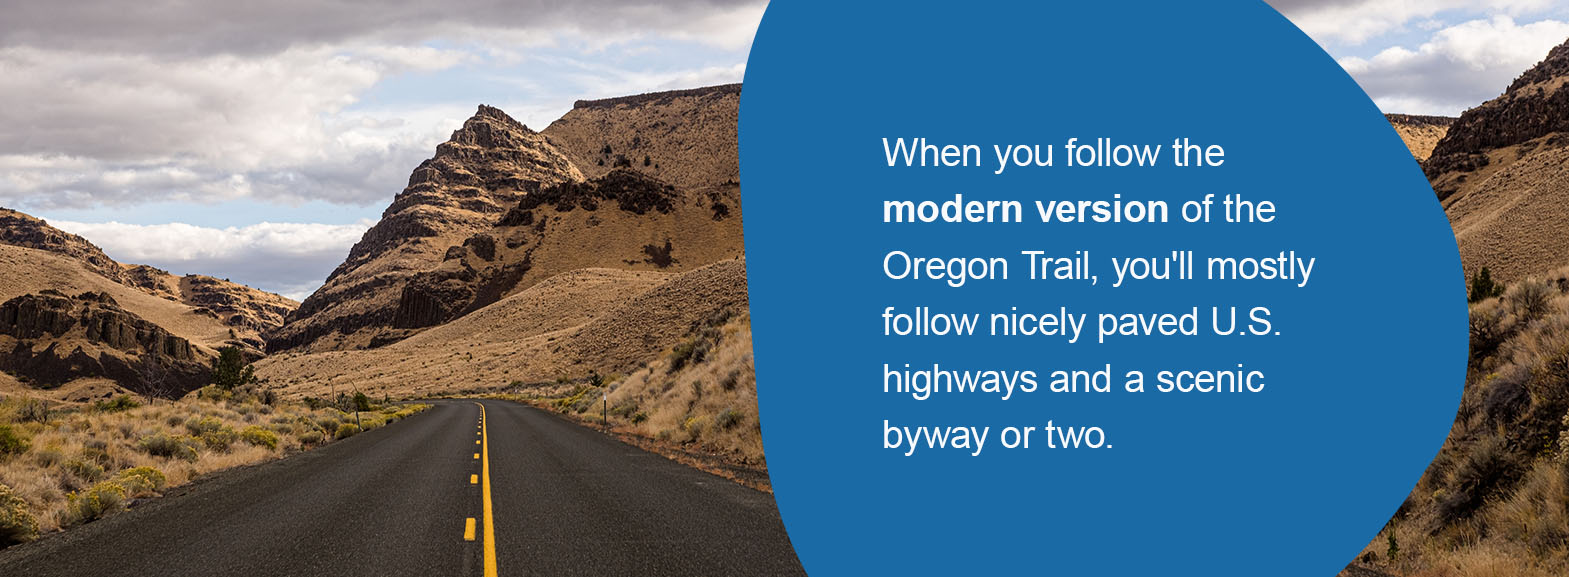 When you follow the modern version of the Oregon Trail, you'll mostly follow nicely paved U.S. highways and a scenic byway or two. 